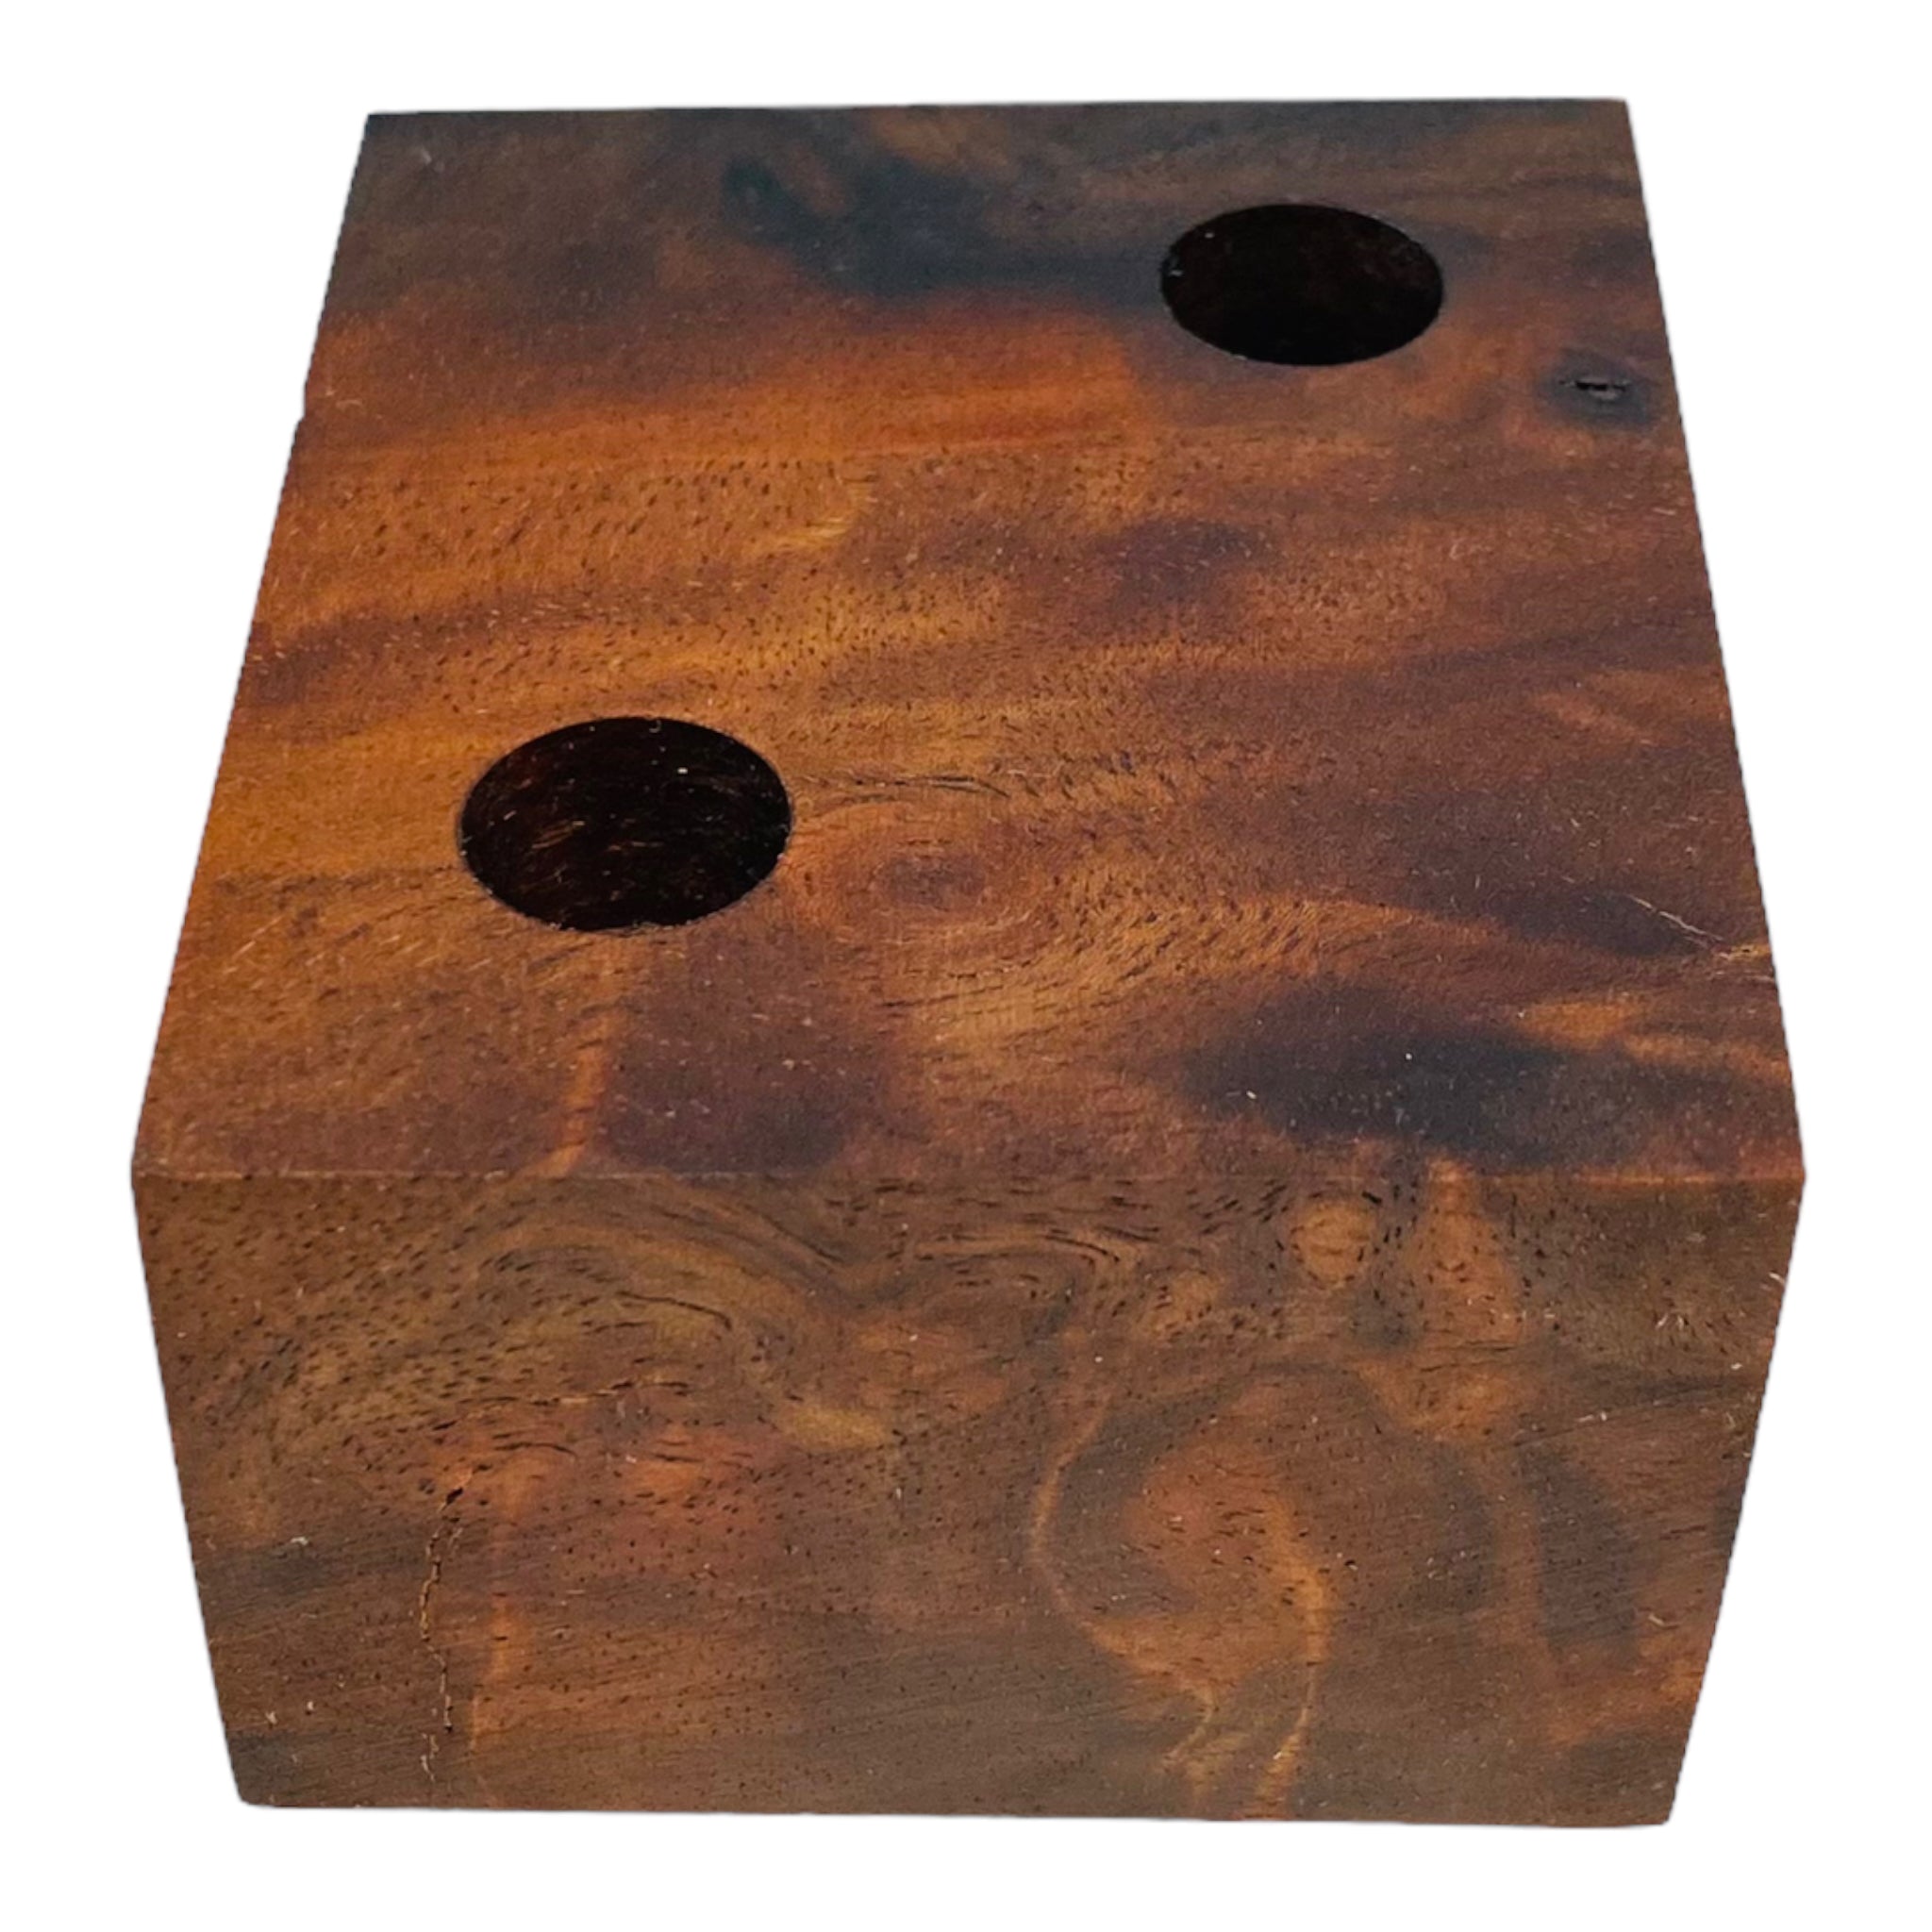 2 Hole Wood Display Stand Holder For 14mm Bong Bowl Pieces Or Quartz Bangers Black Walnut Burl perfect for displaying bong bowls, quartz bangers, marbles, and carb caps